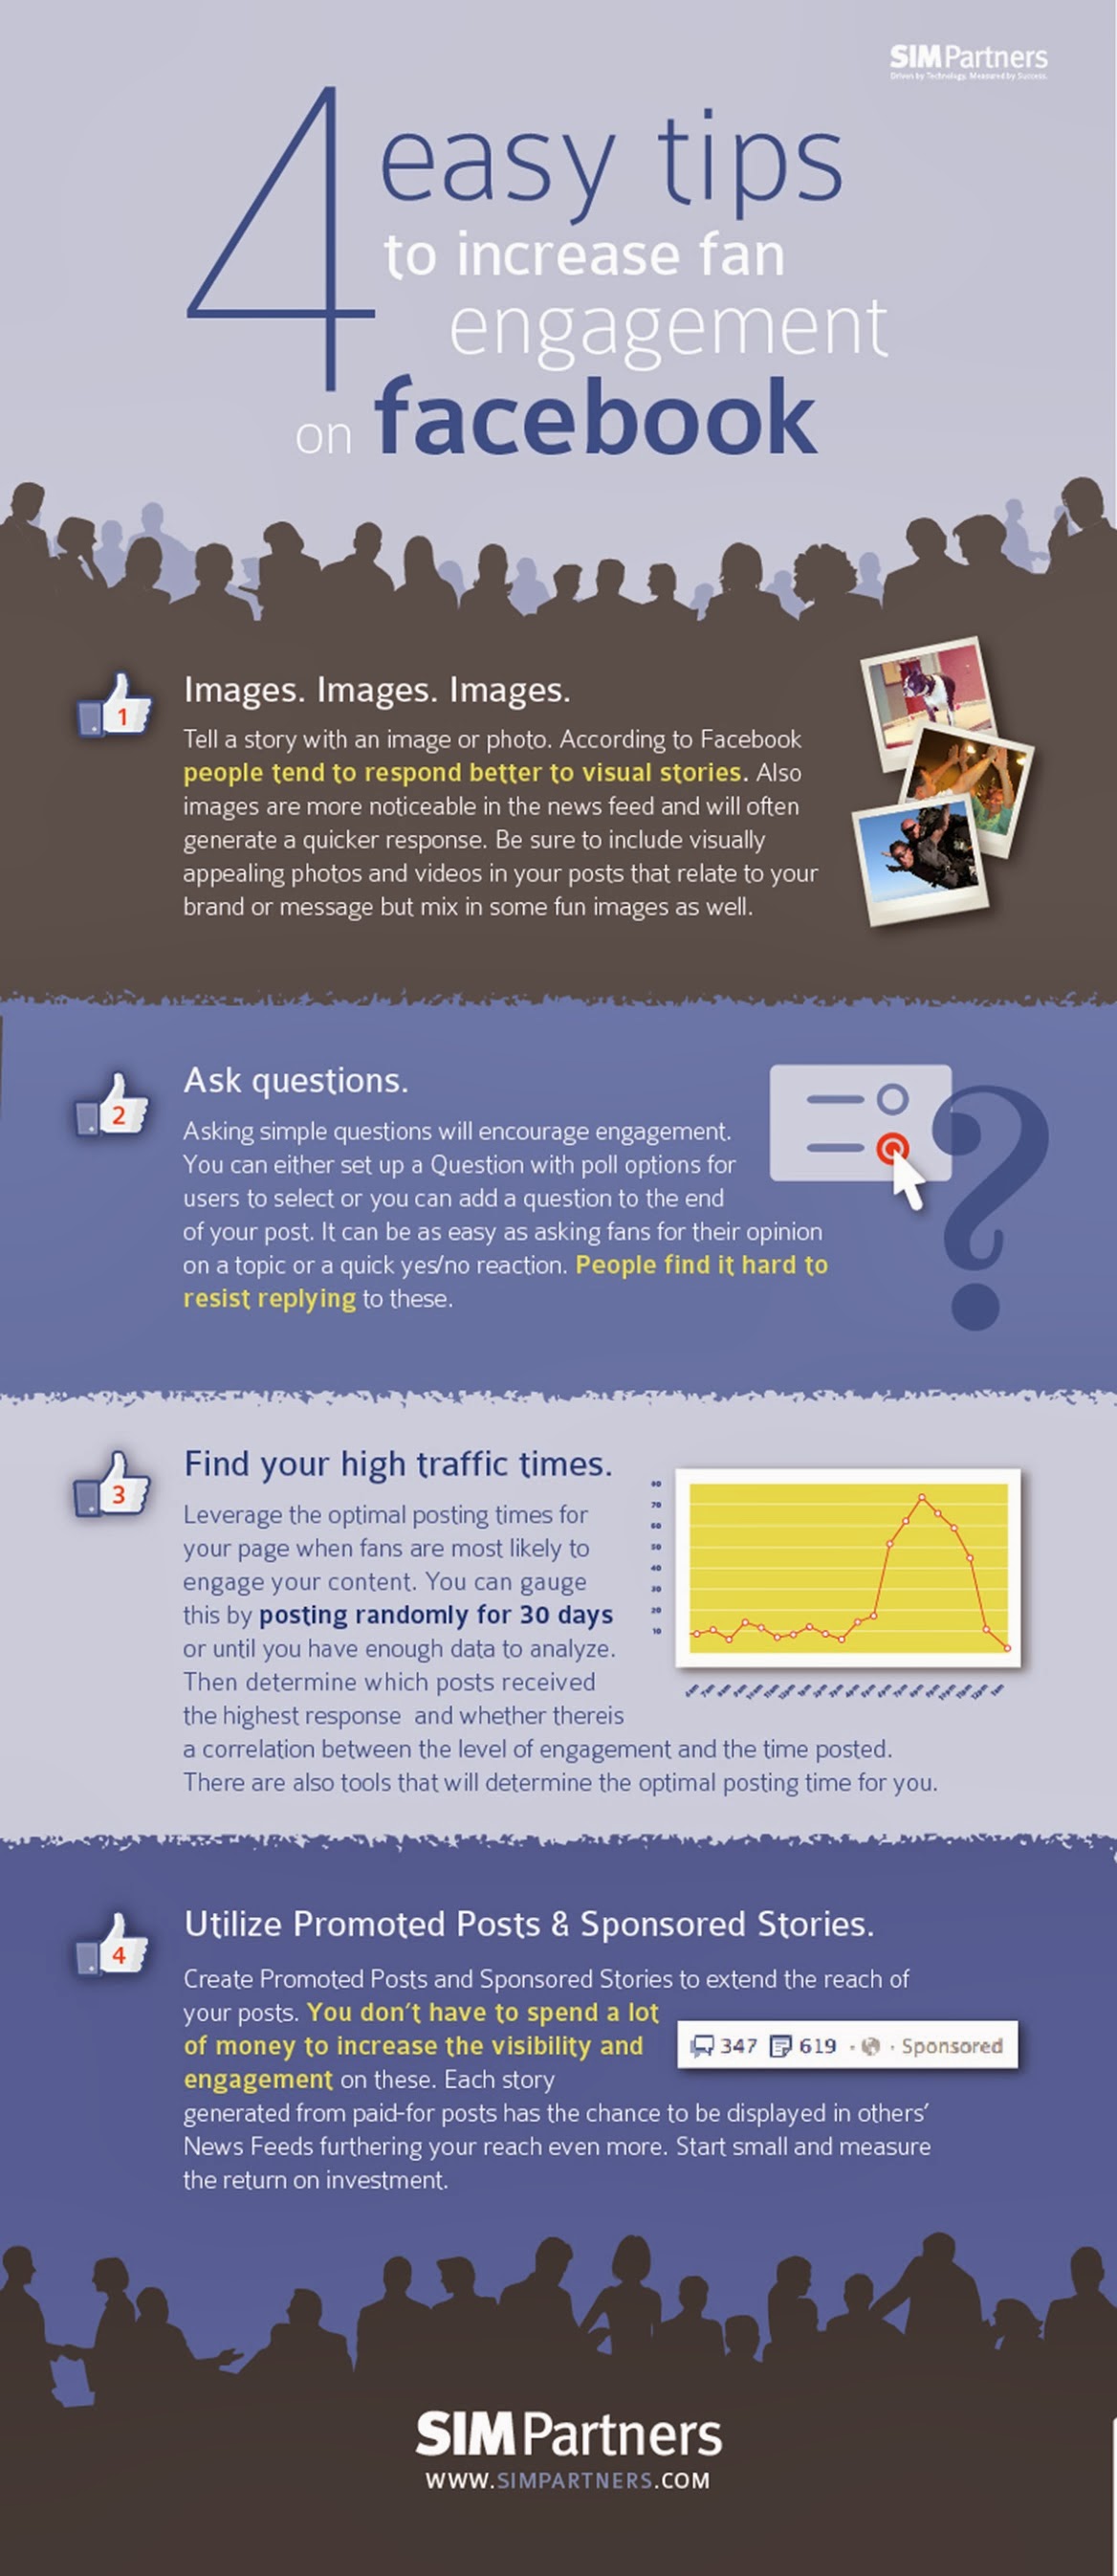 4 Effective tips to Increase Fan Engagement on Facebook [INFOGRAPHIC]